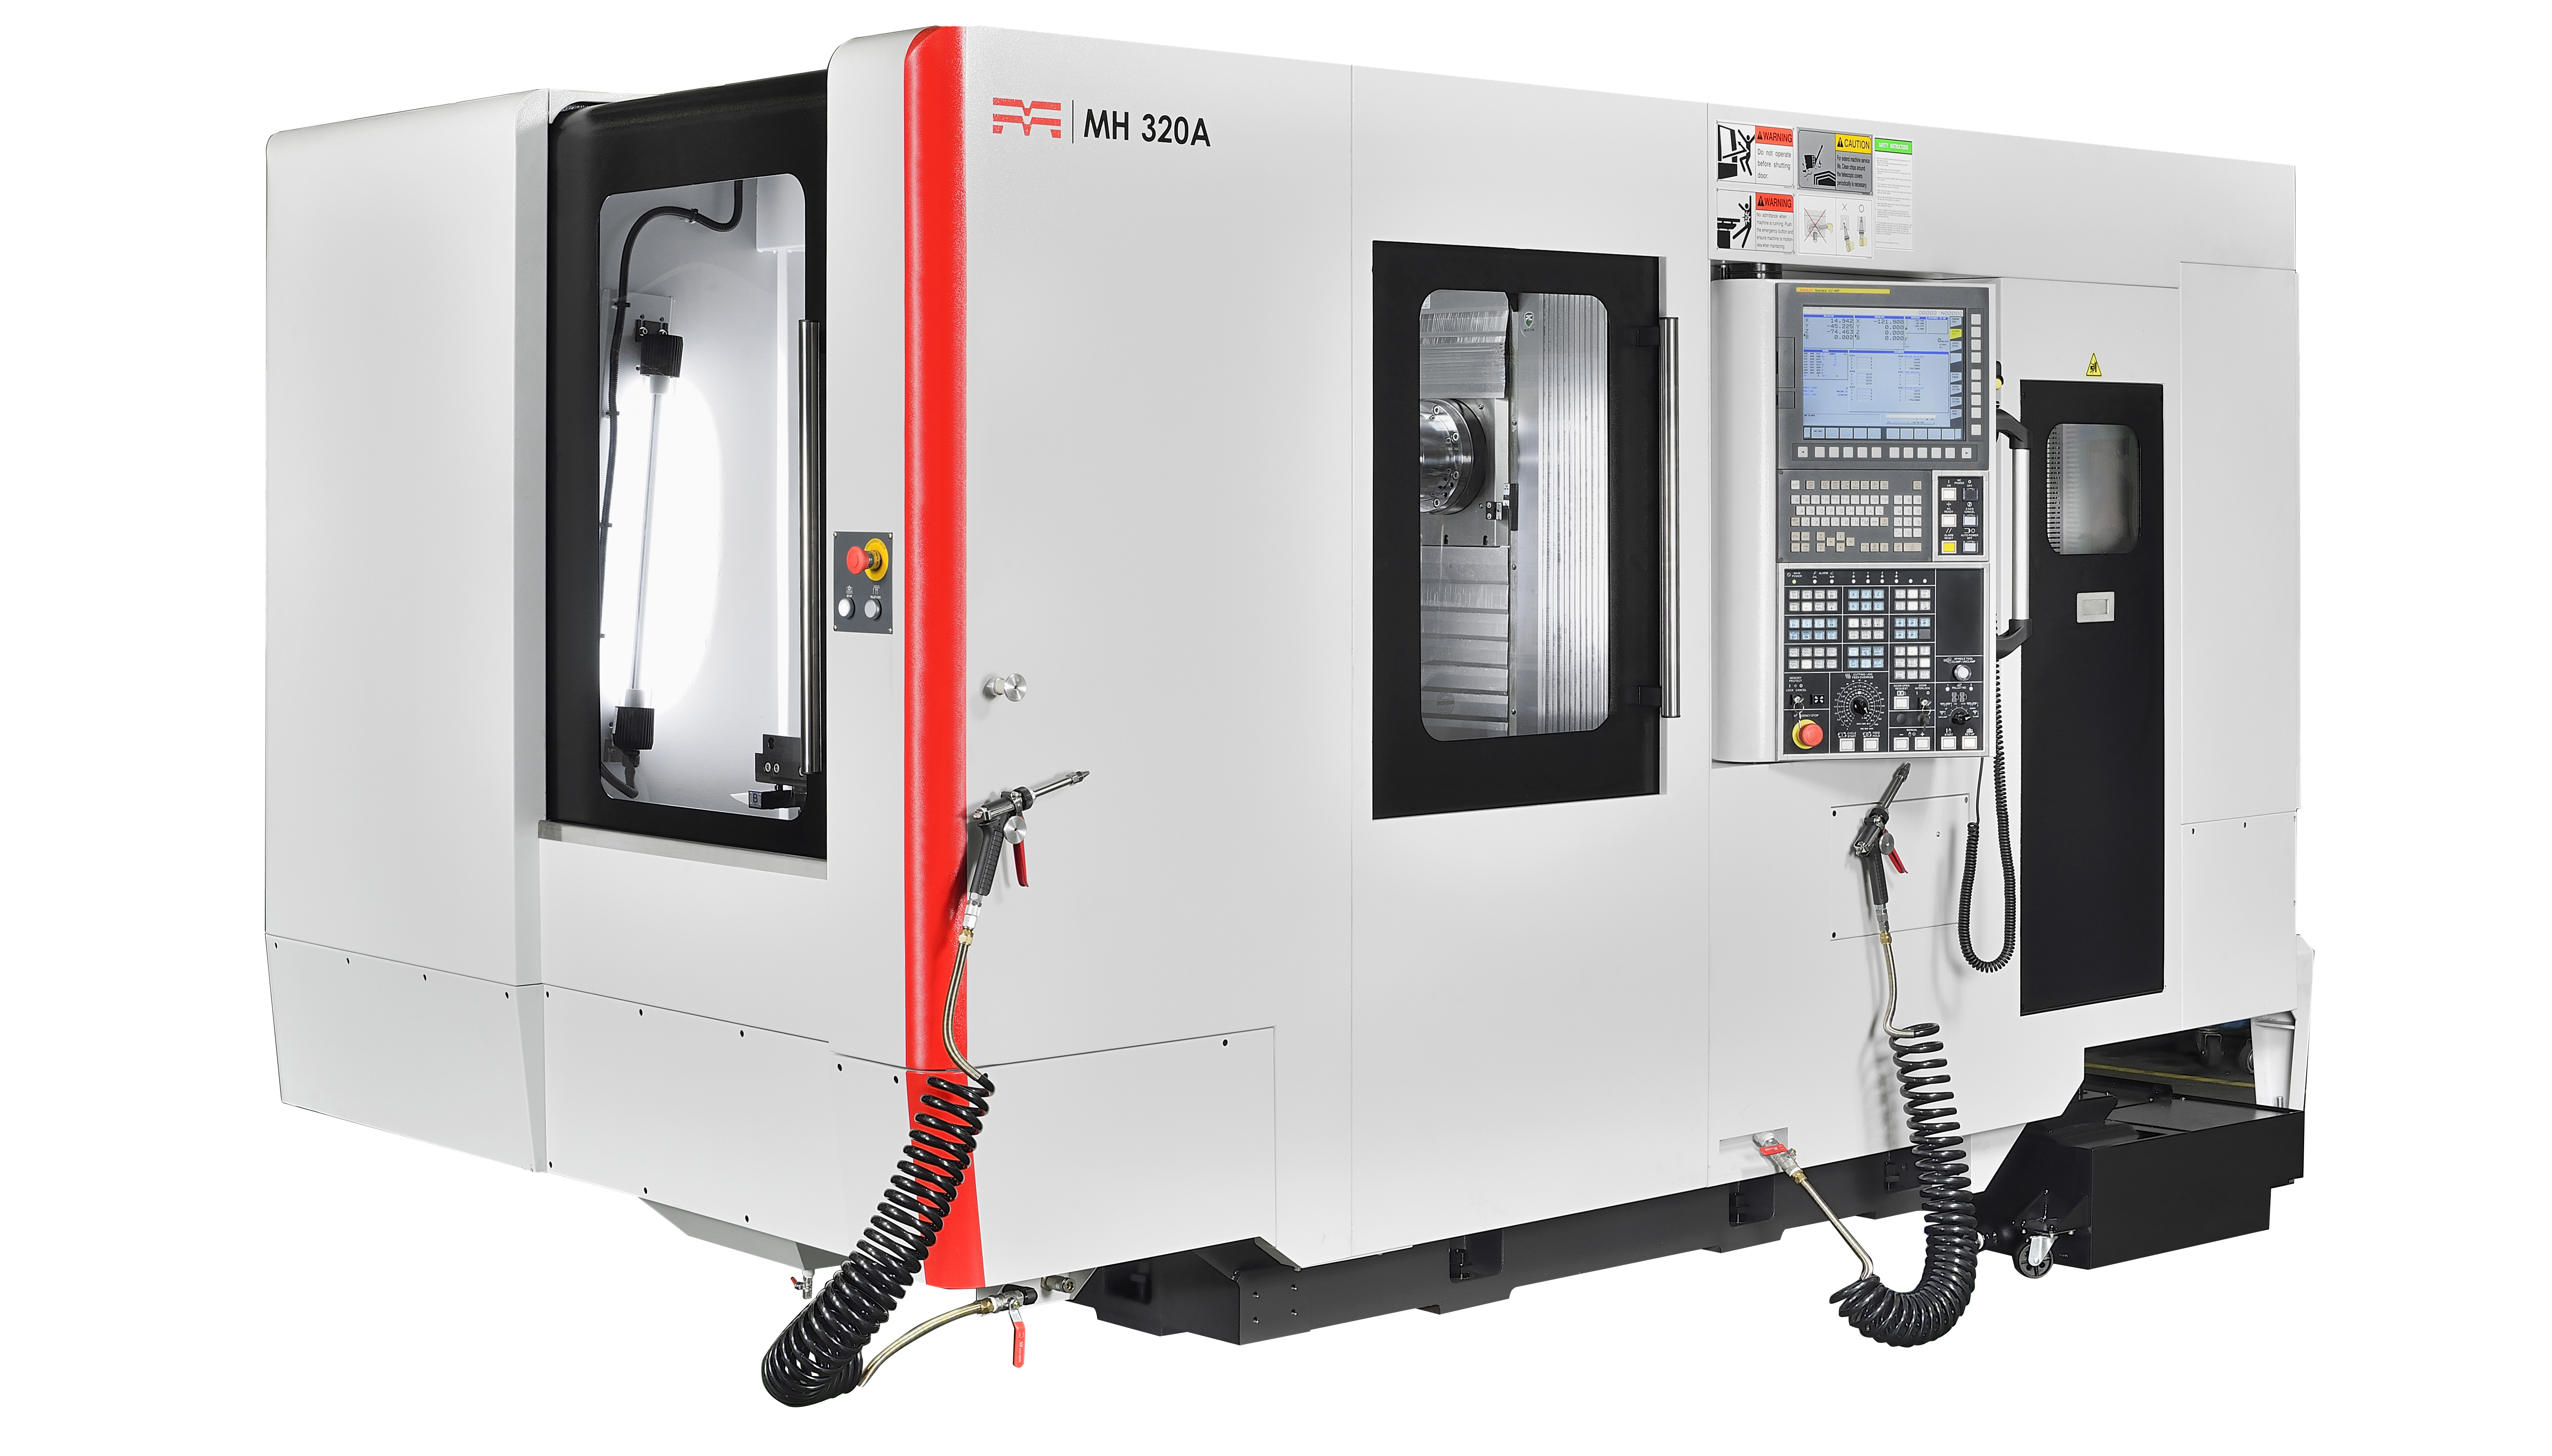 The small MH 320A HMC can give shops used to vertical machines a big throughput boost.